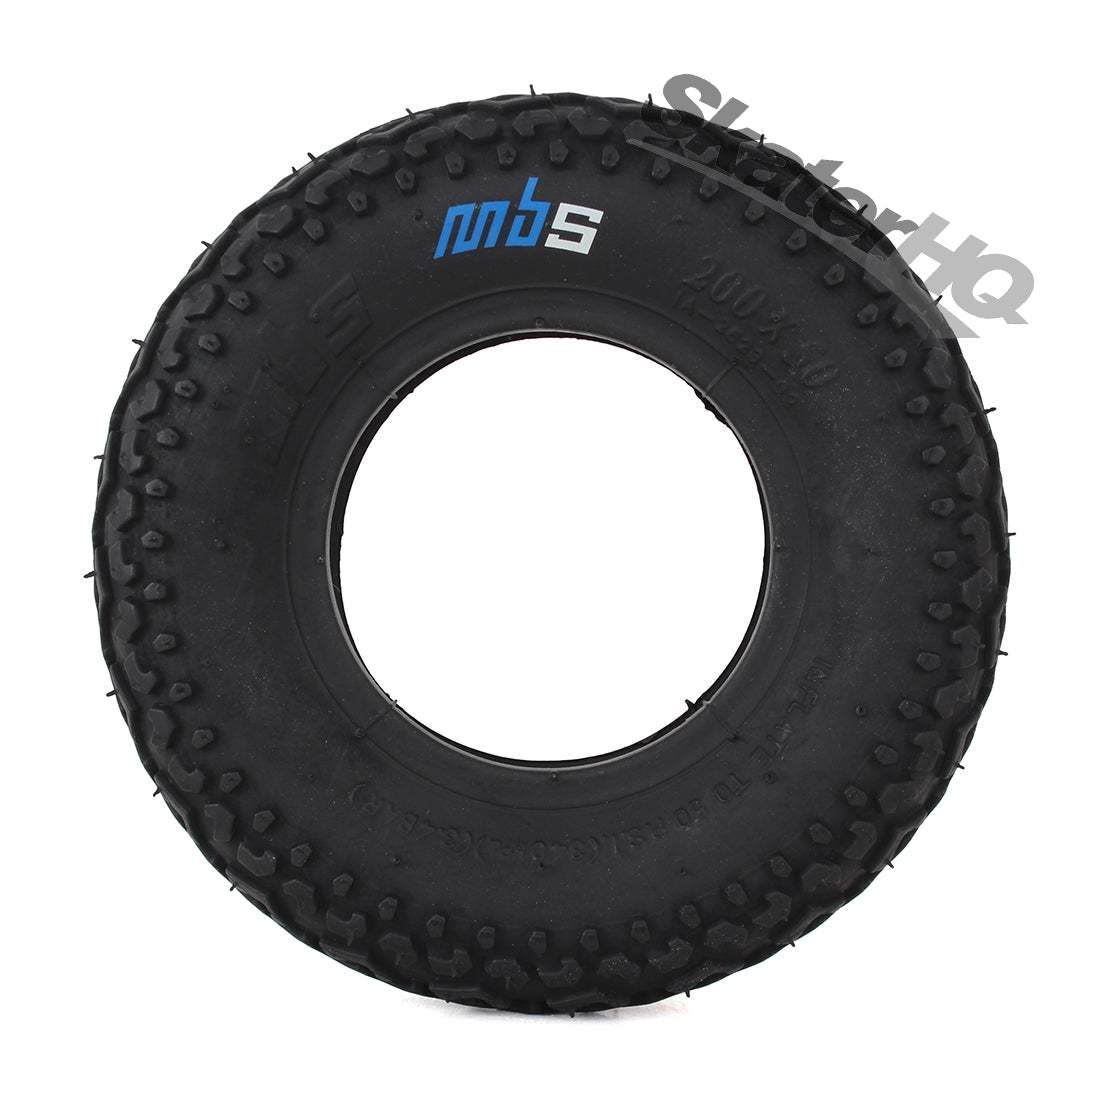 MBS T1 Tire 200x50 Black - Single Skateboard Hardware and Parts